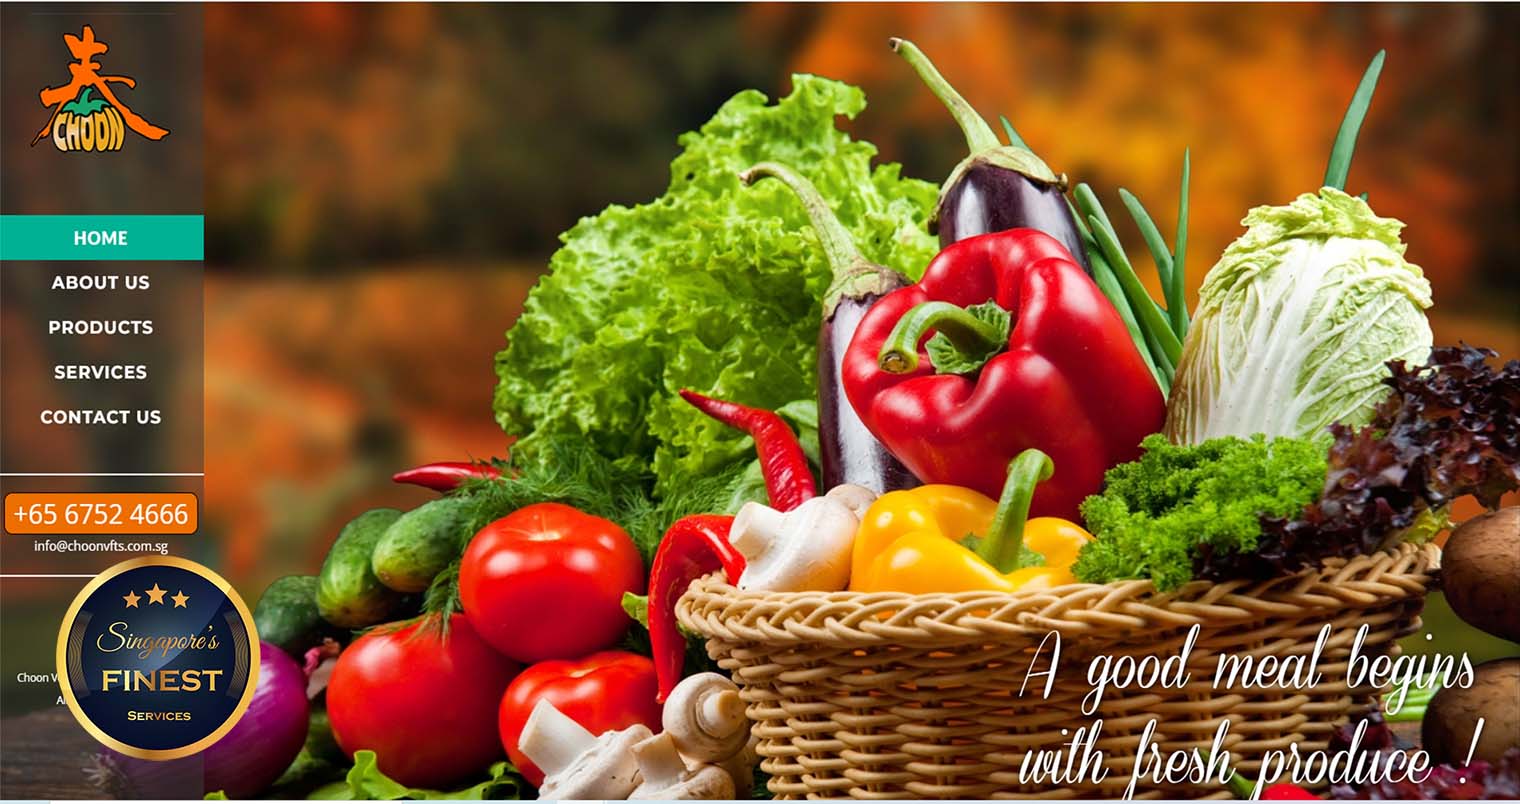 Choon Vegetables & Fruits Trading - Vegetable Suppliers in Singapore